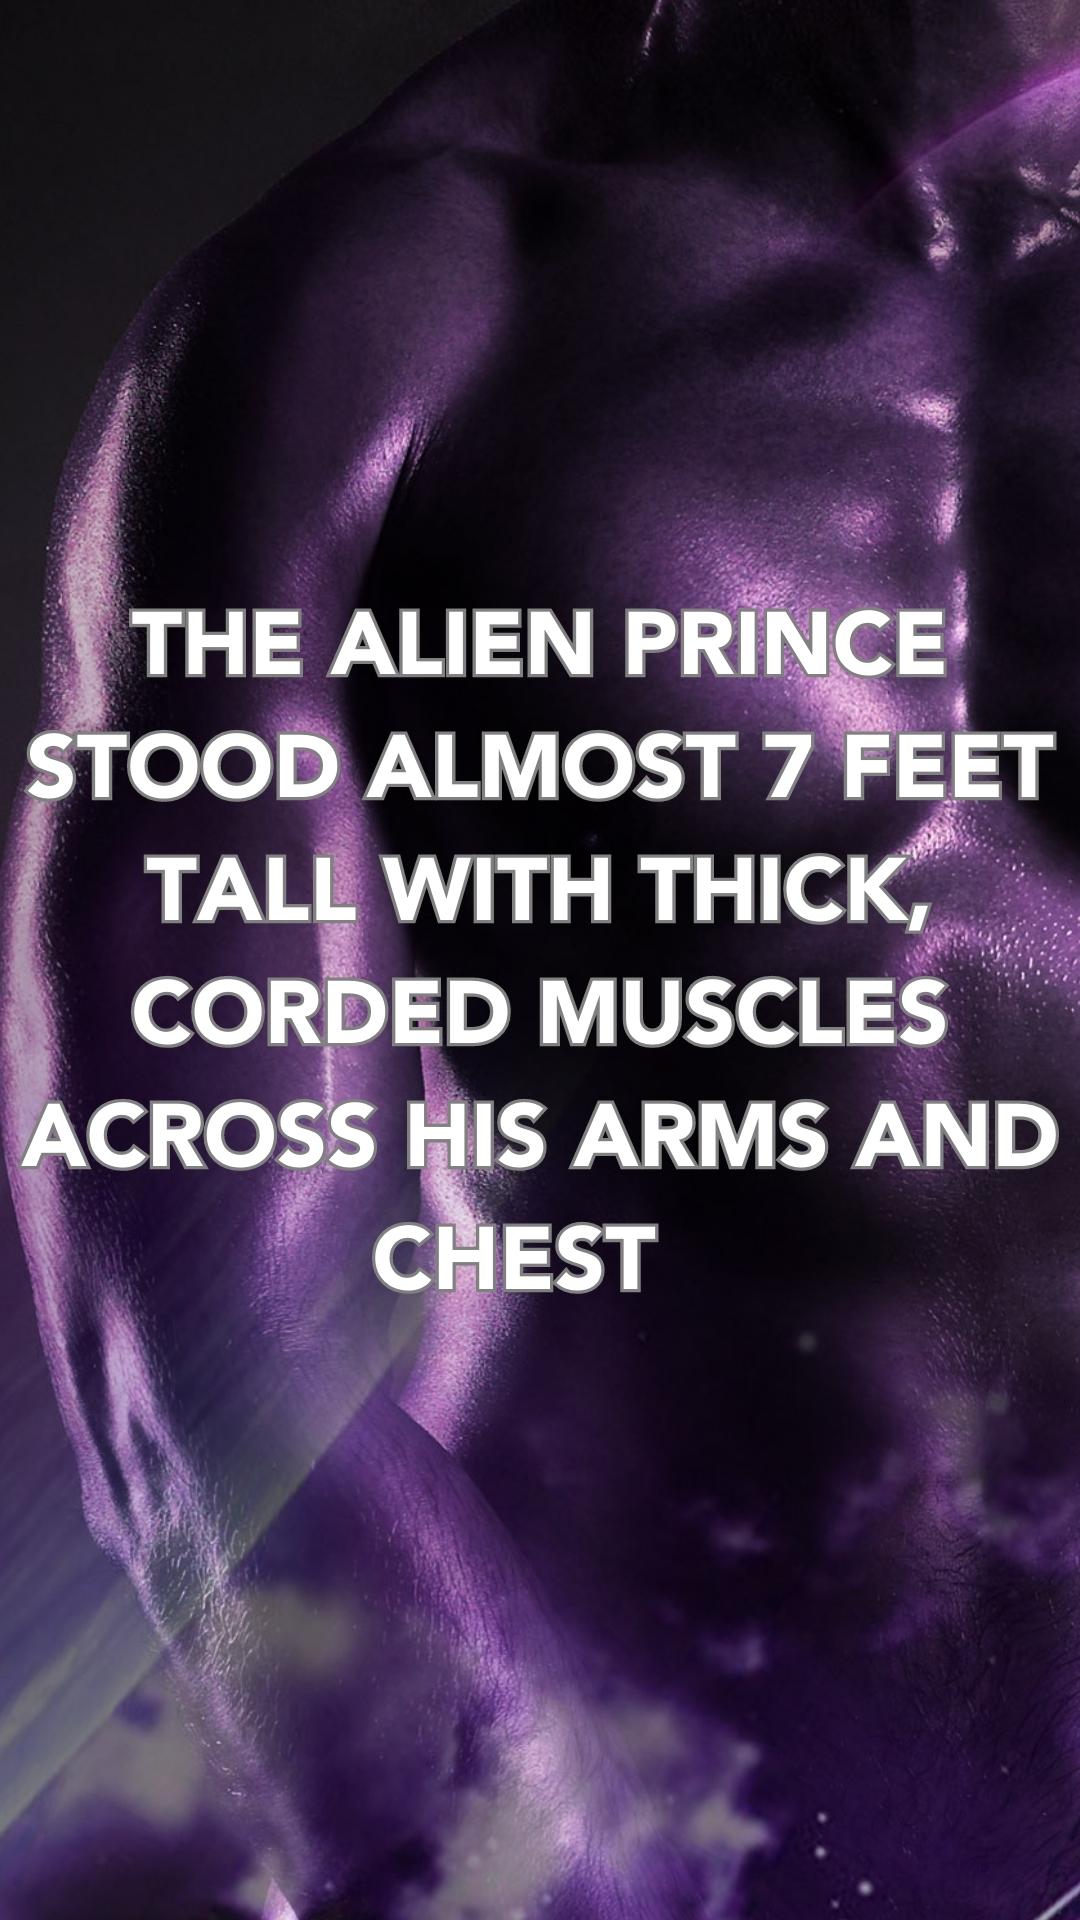 he alien prince stood almost 7 ft tall with thick corded muscles across his arms and chest